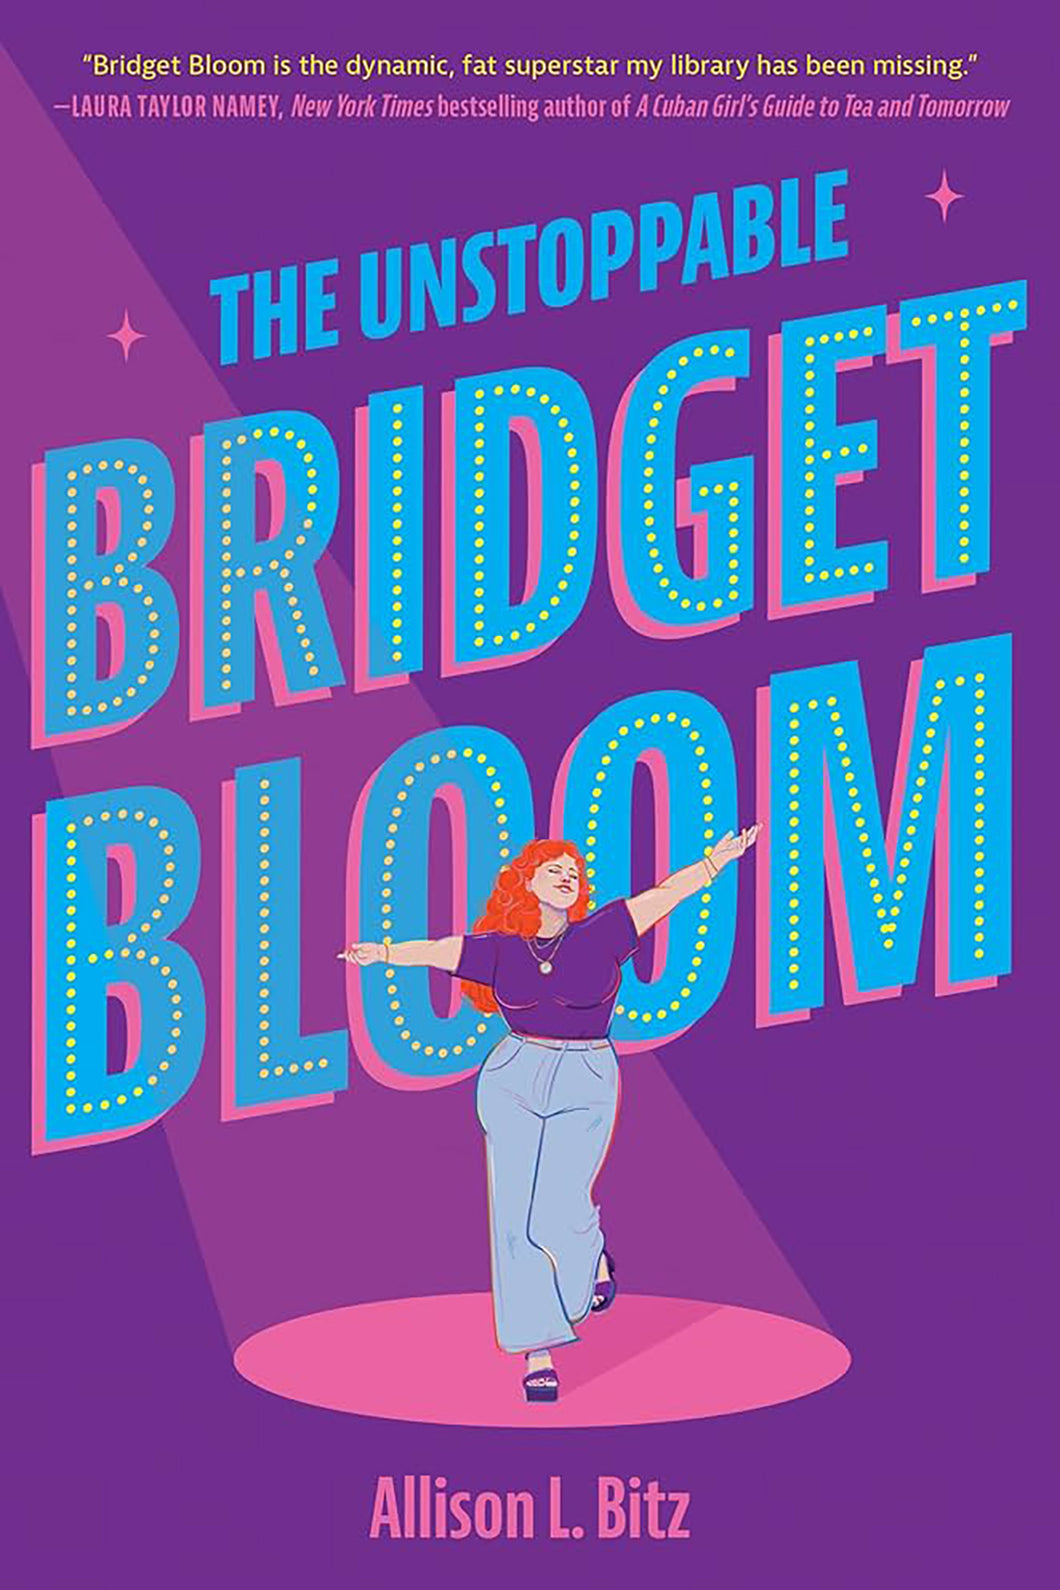 The Unstoppable Bridget Bloom by Allison L. Bitz / Hardcover - NEW BOOK